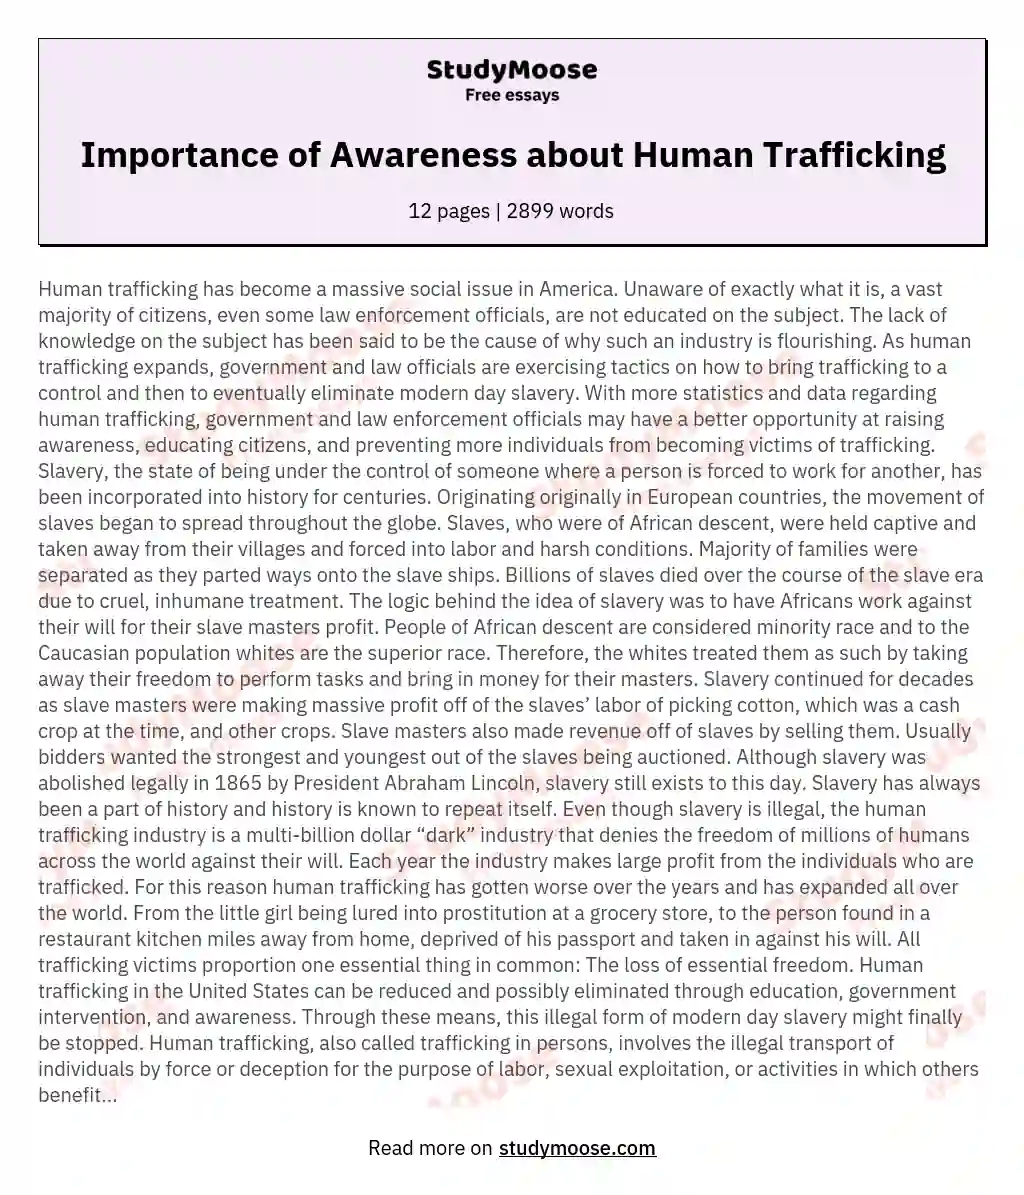 Importance of Awareness about Human Trafficking essay